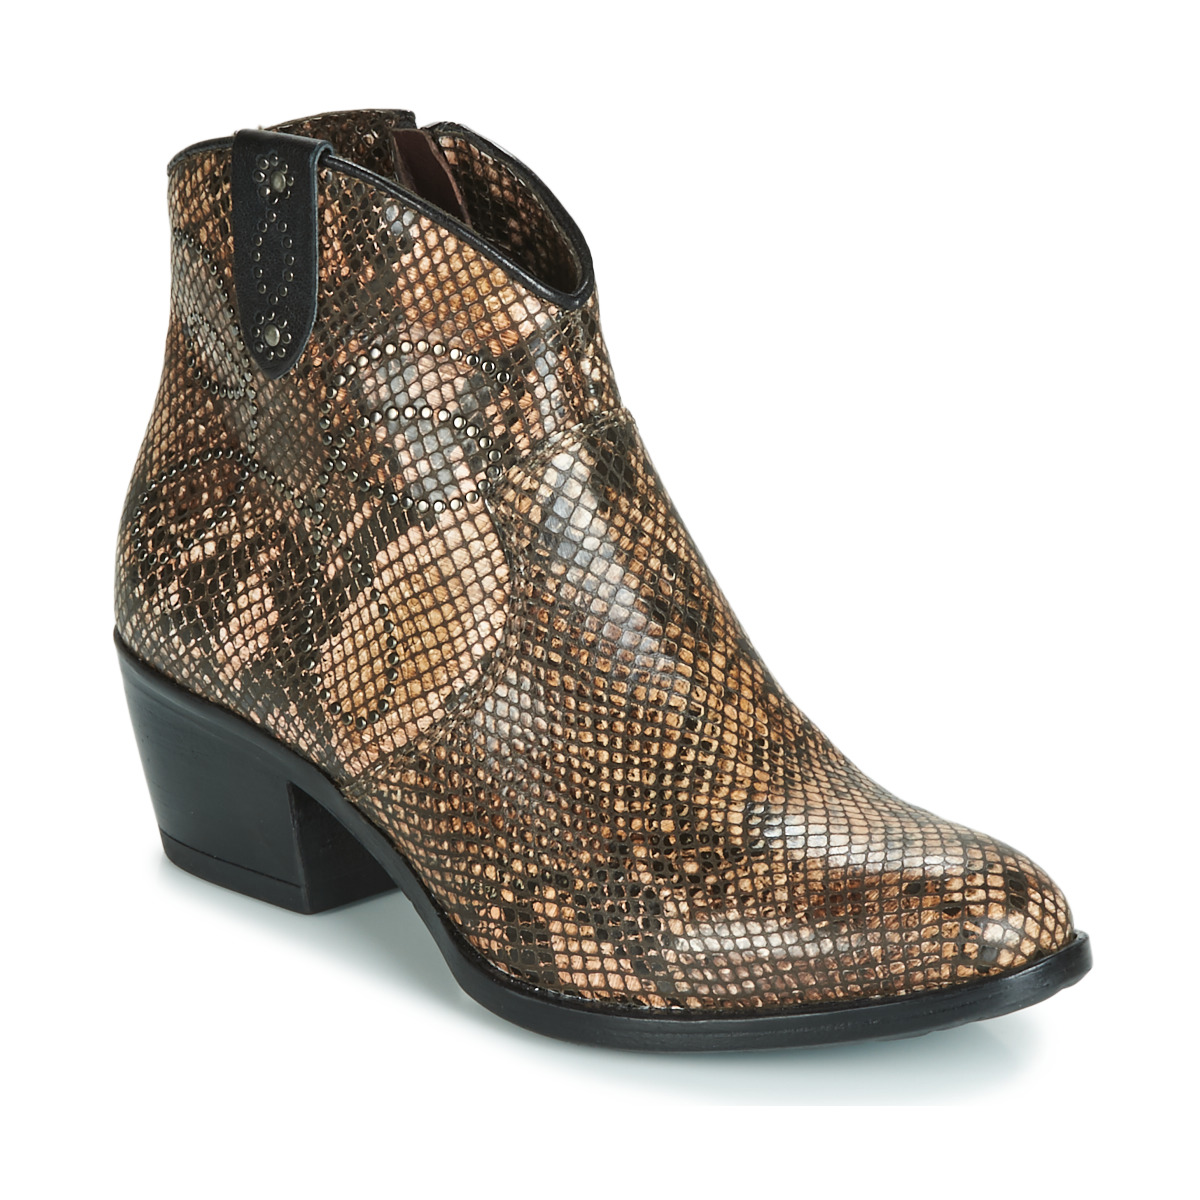 Chaussures Femme Boots Metamorf'Ose FALERS Python